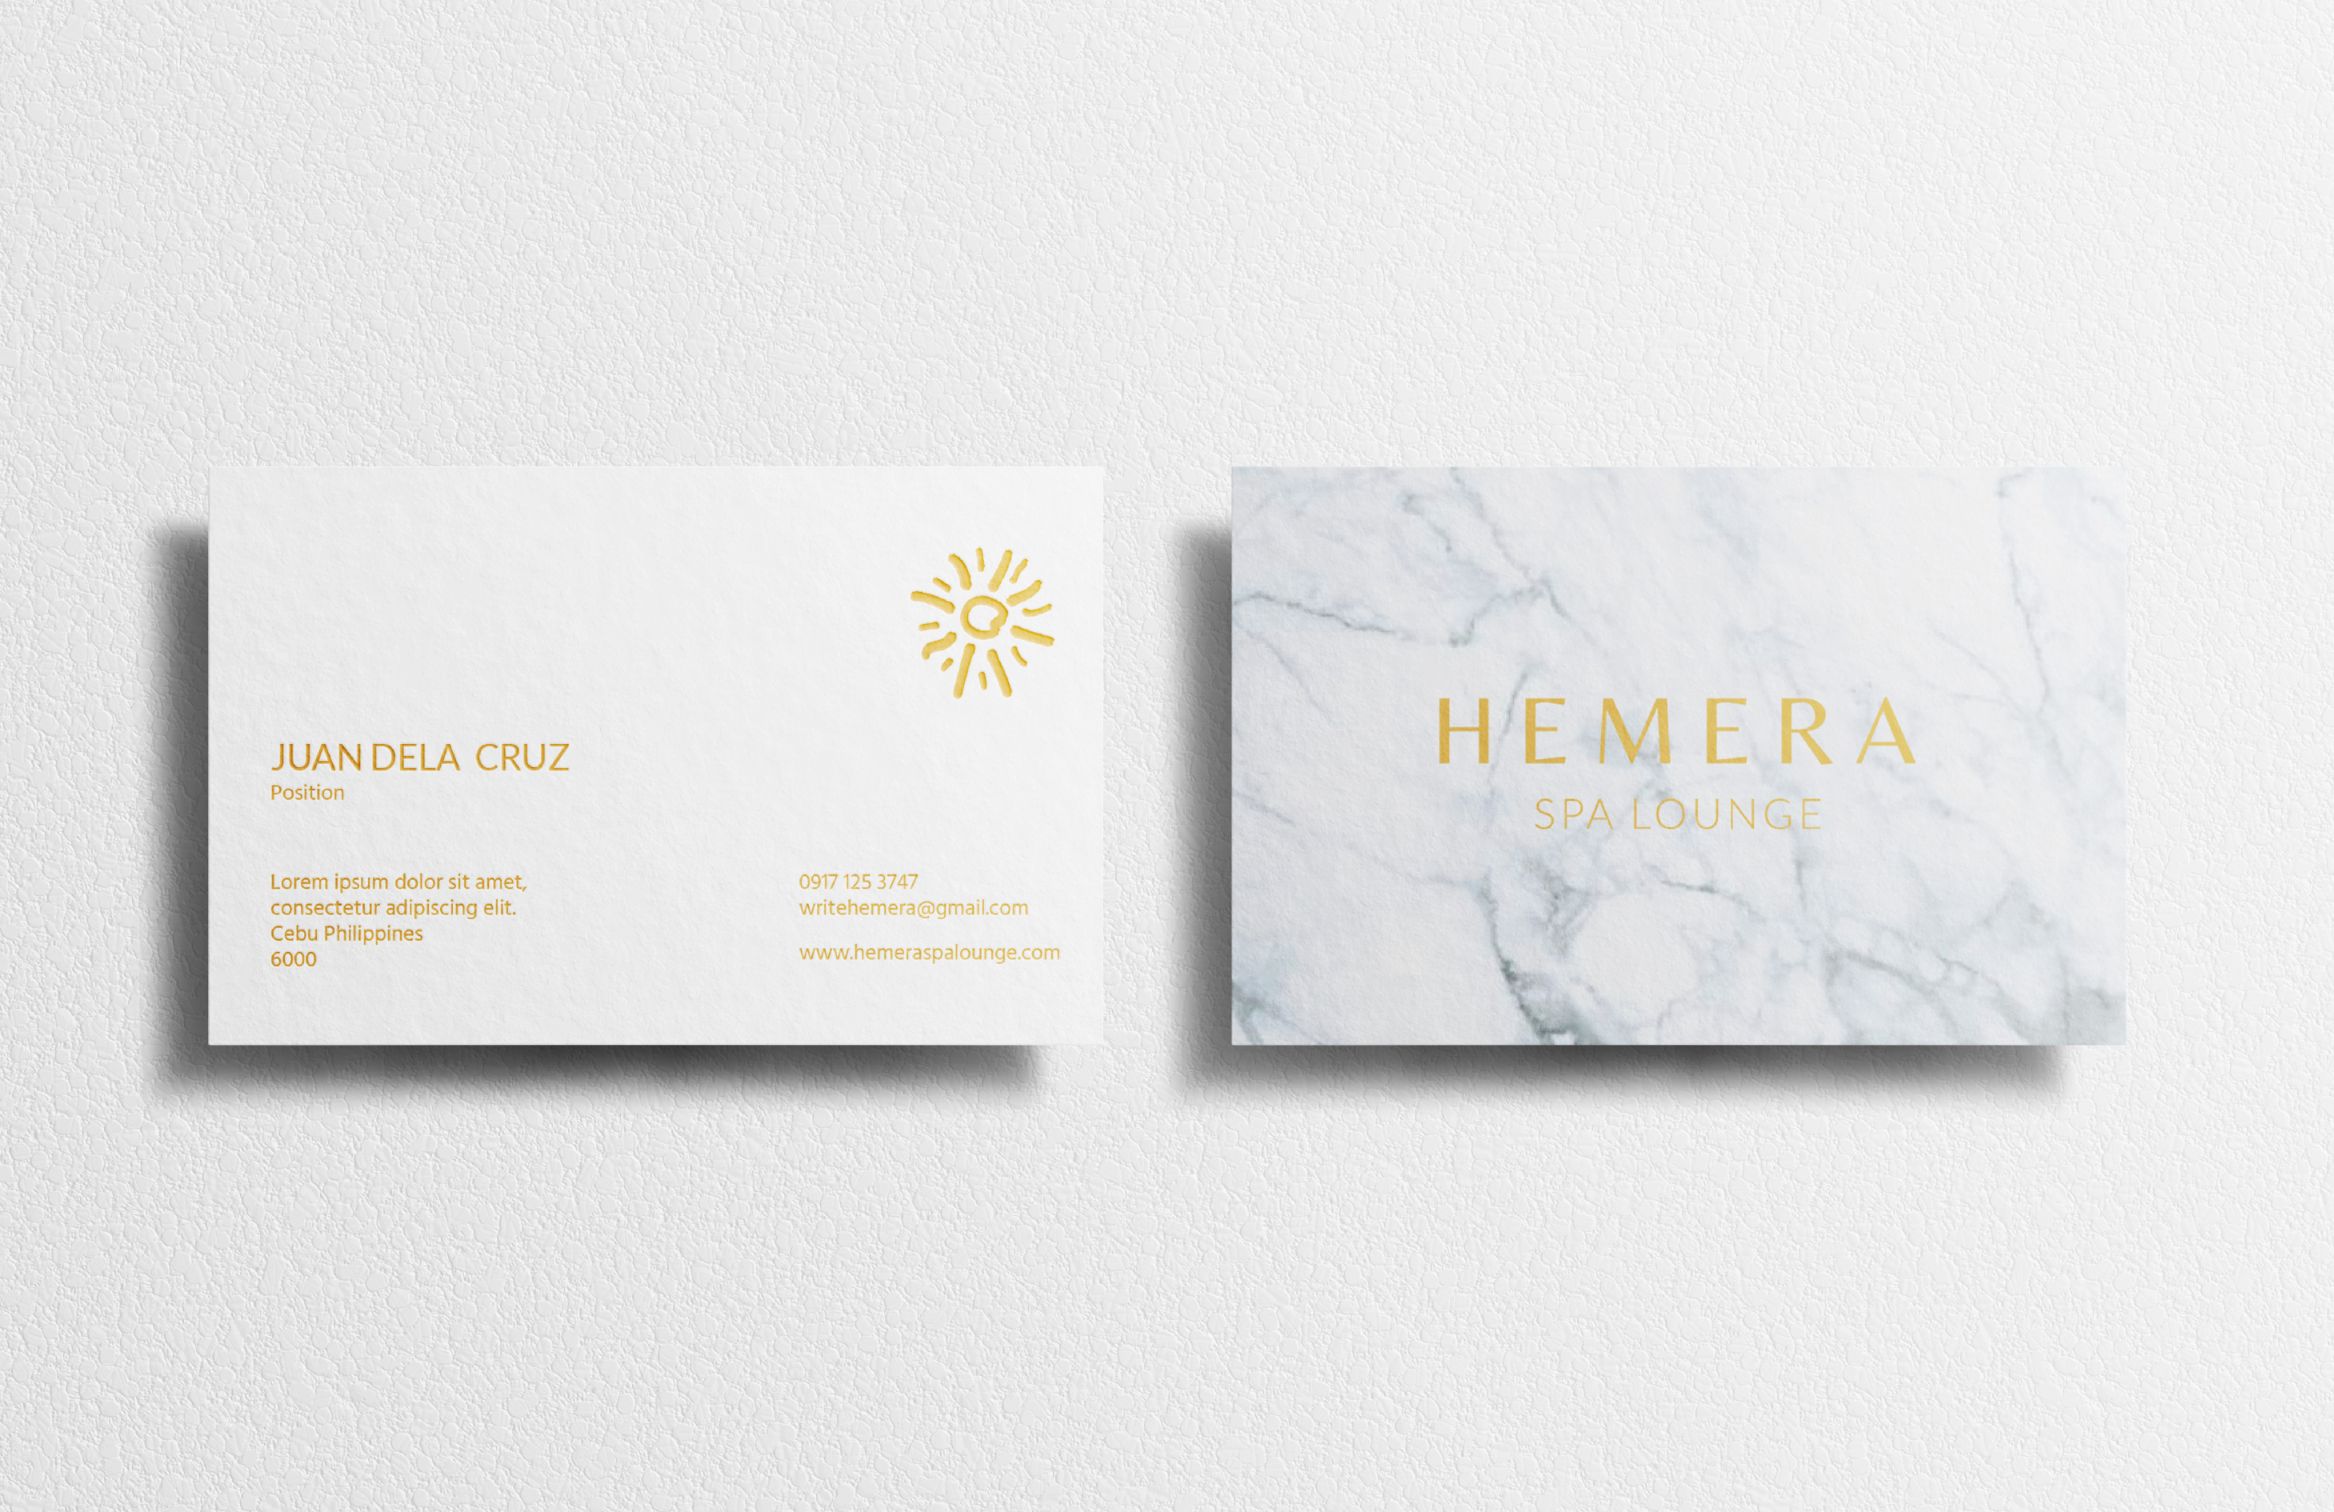 Brand application of the logo on a business card